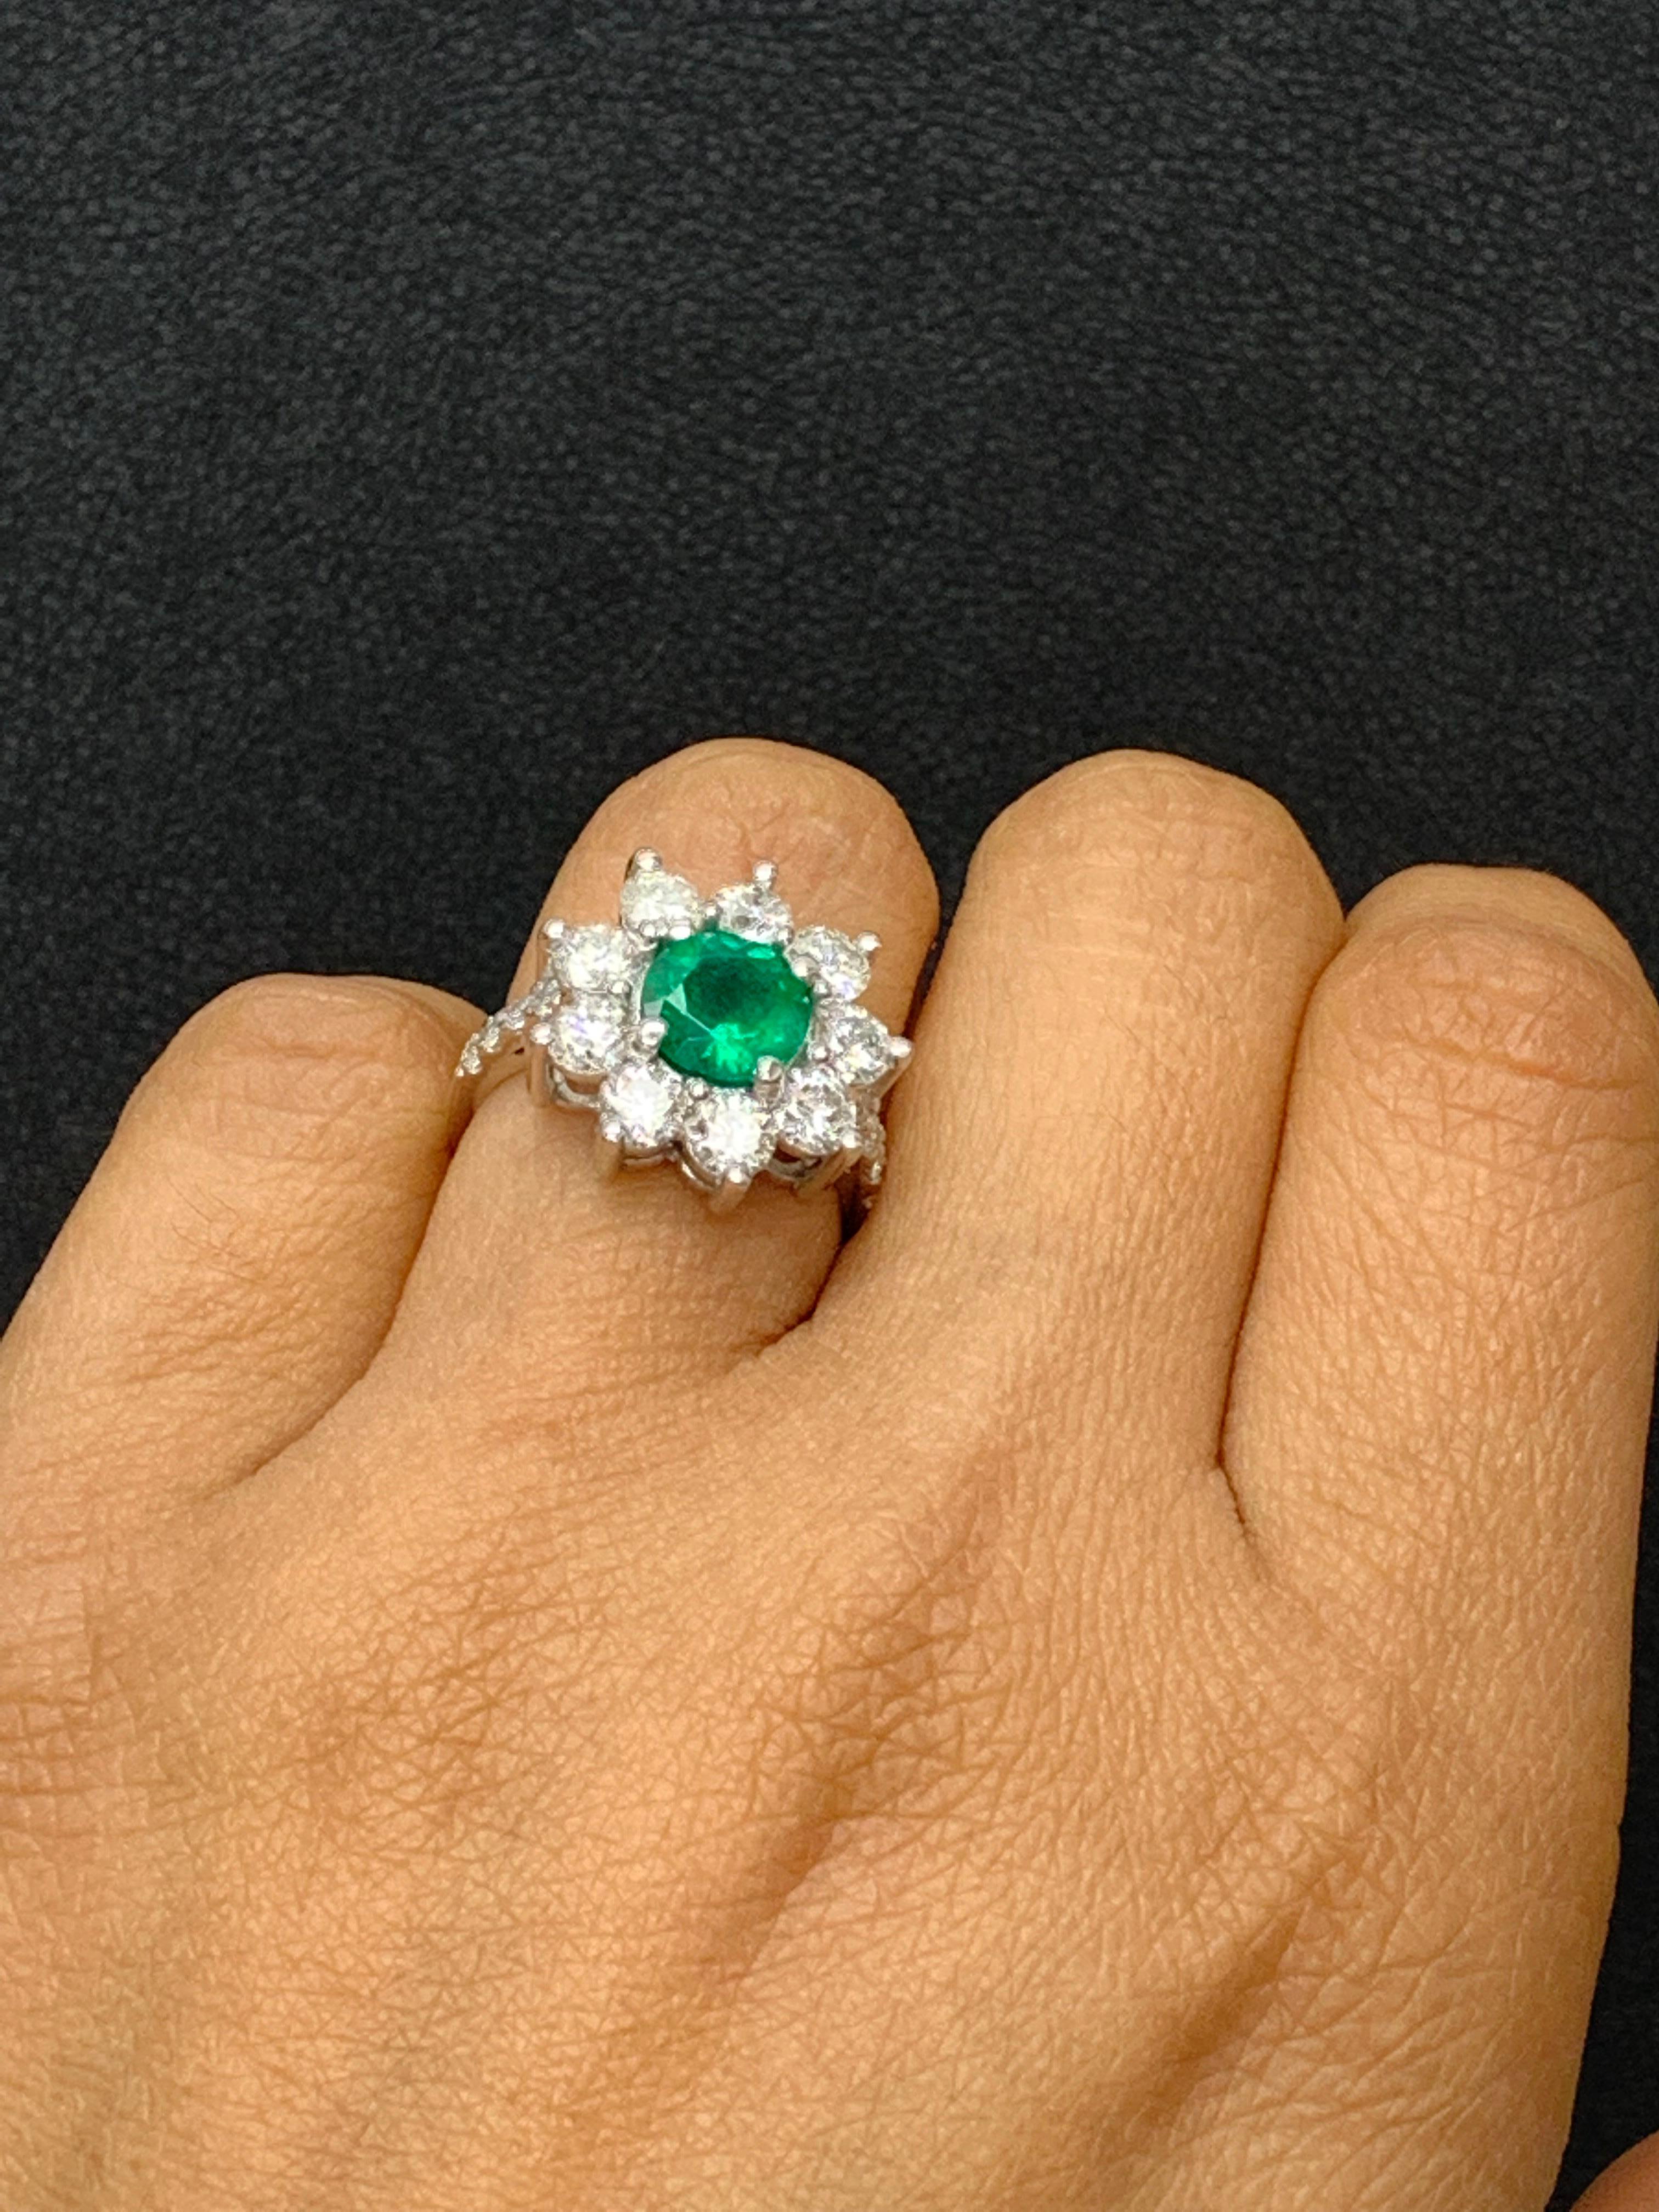 1.18 Carat Brilliant Cut Emerald and Diamond Ring in 14K White Gold For Sale 7